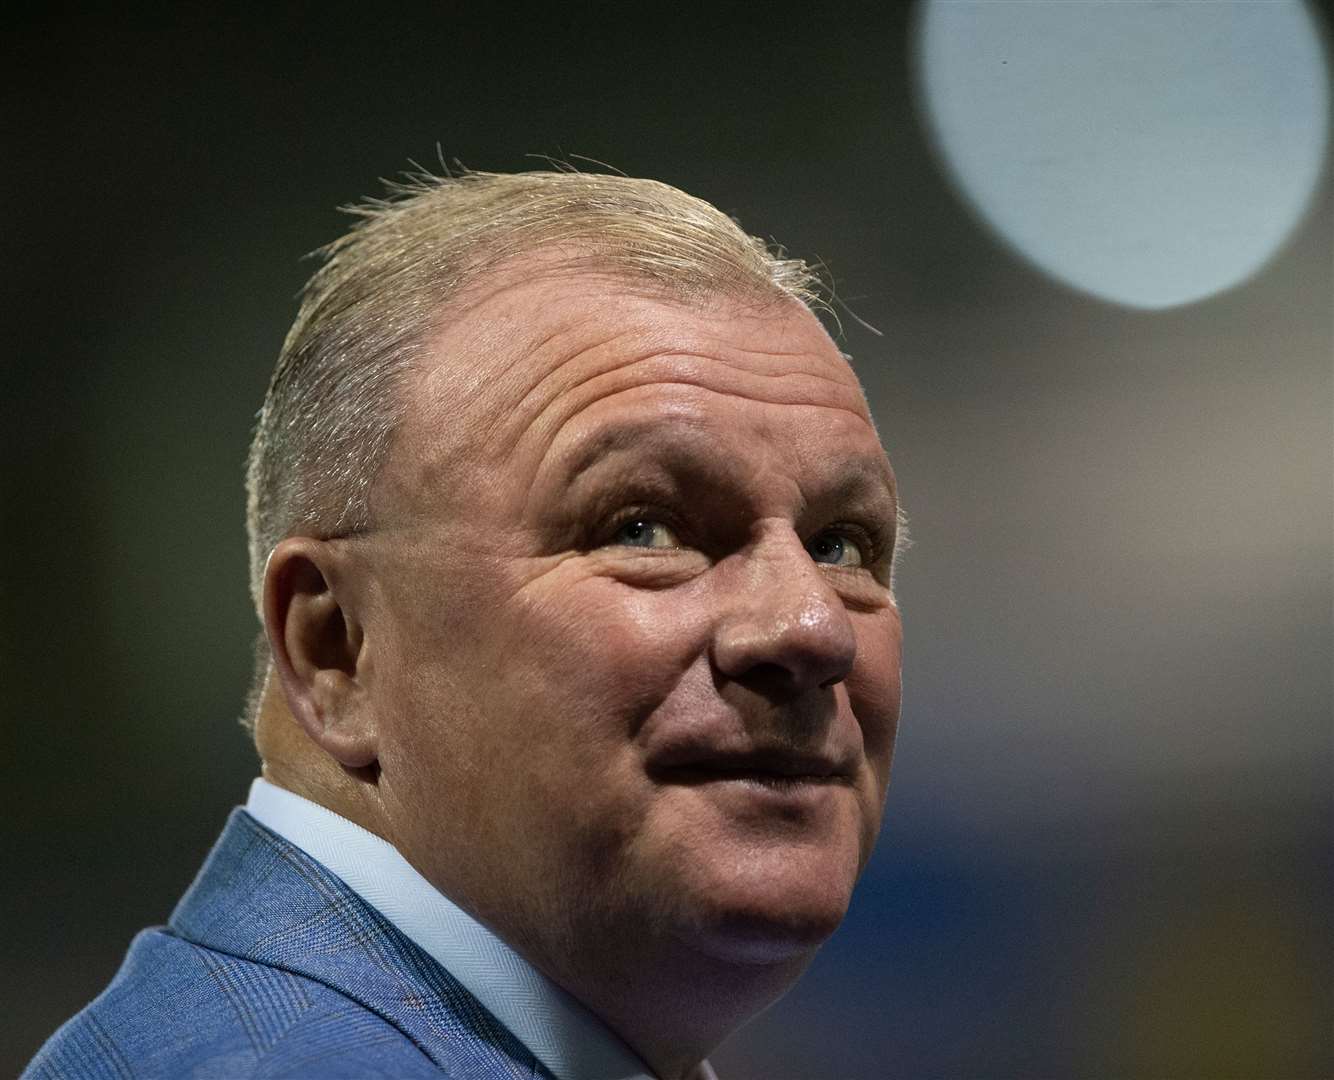 Gillingham manager Steve Evans is looking forward to facing his old mate David Moyes this weekend